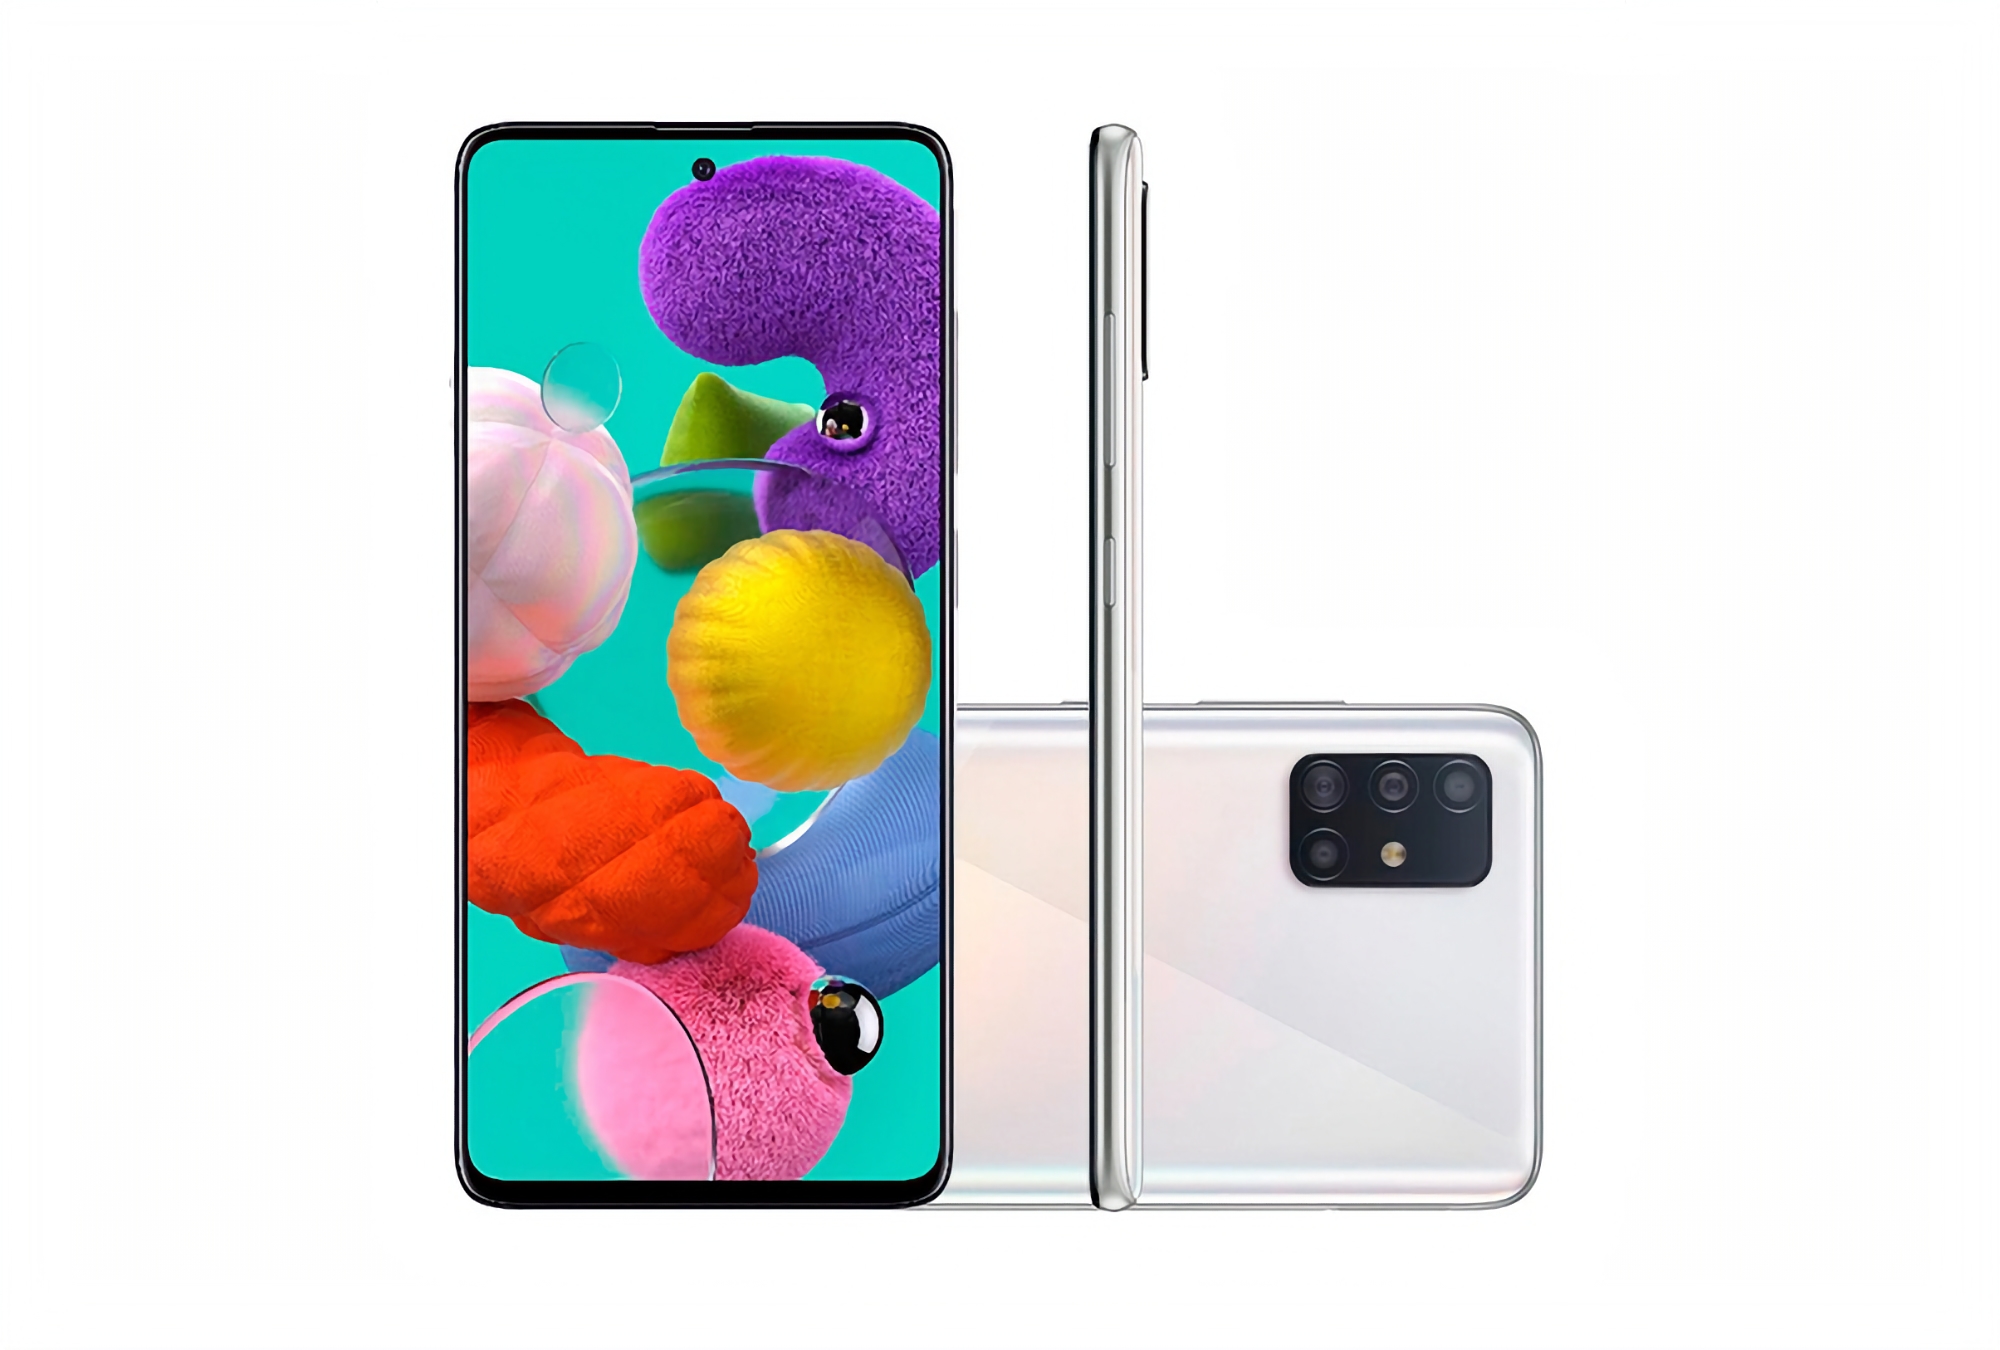 One of Samsung's best-selling smartphones of 2020 gets a new software version